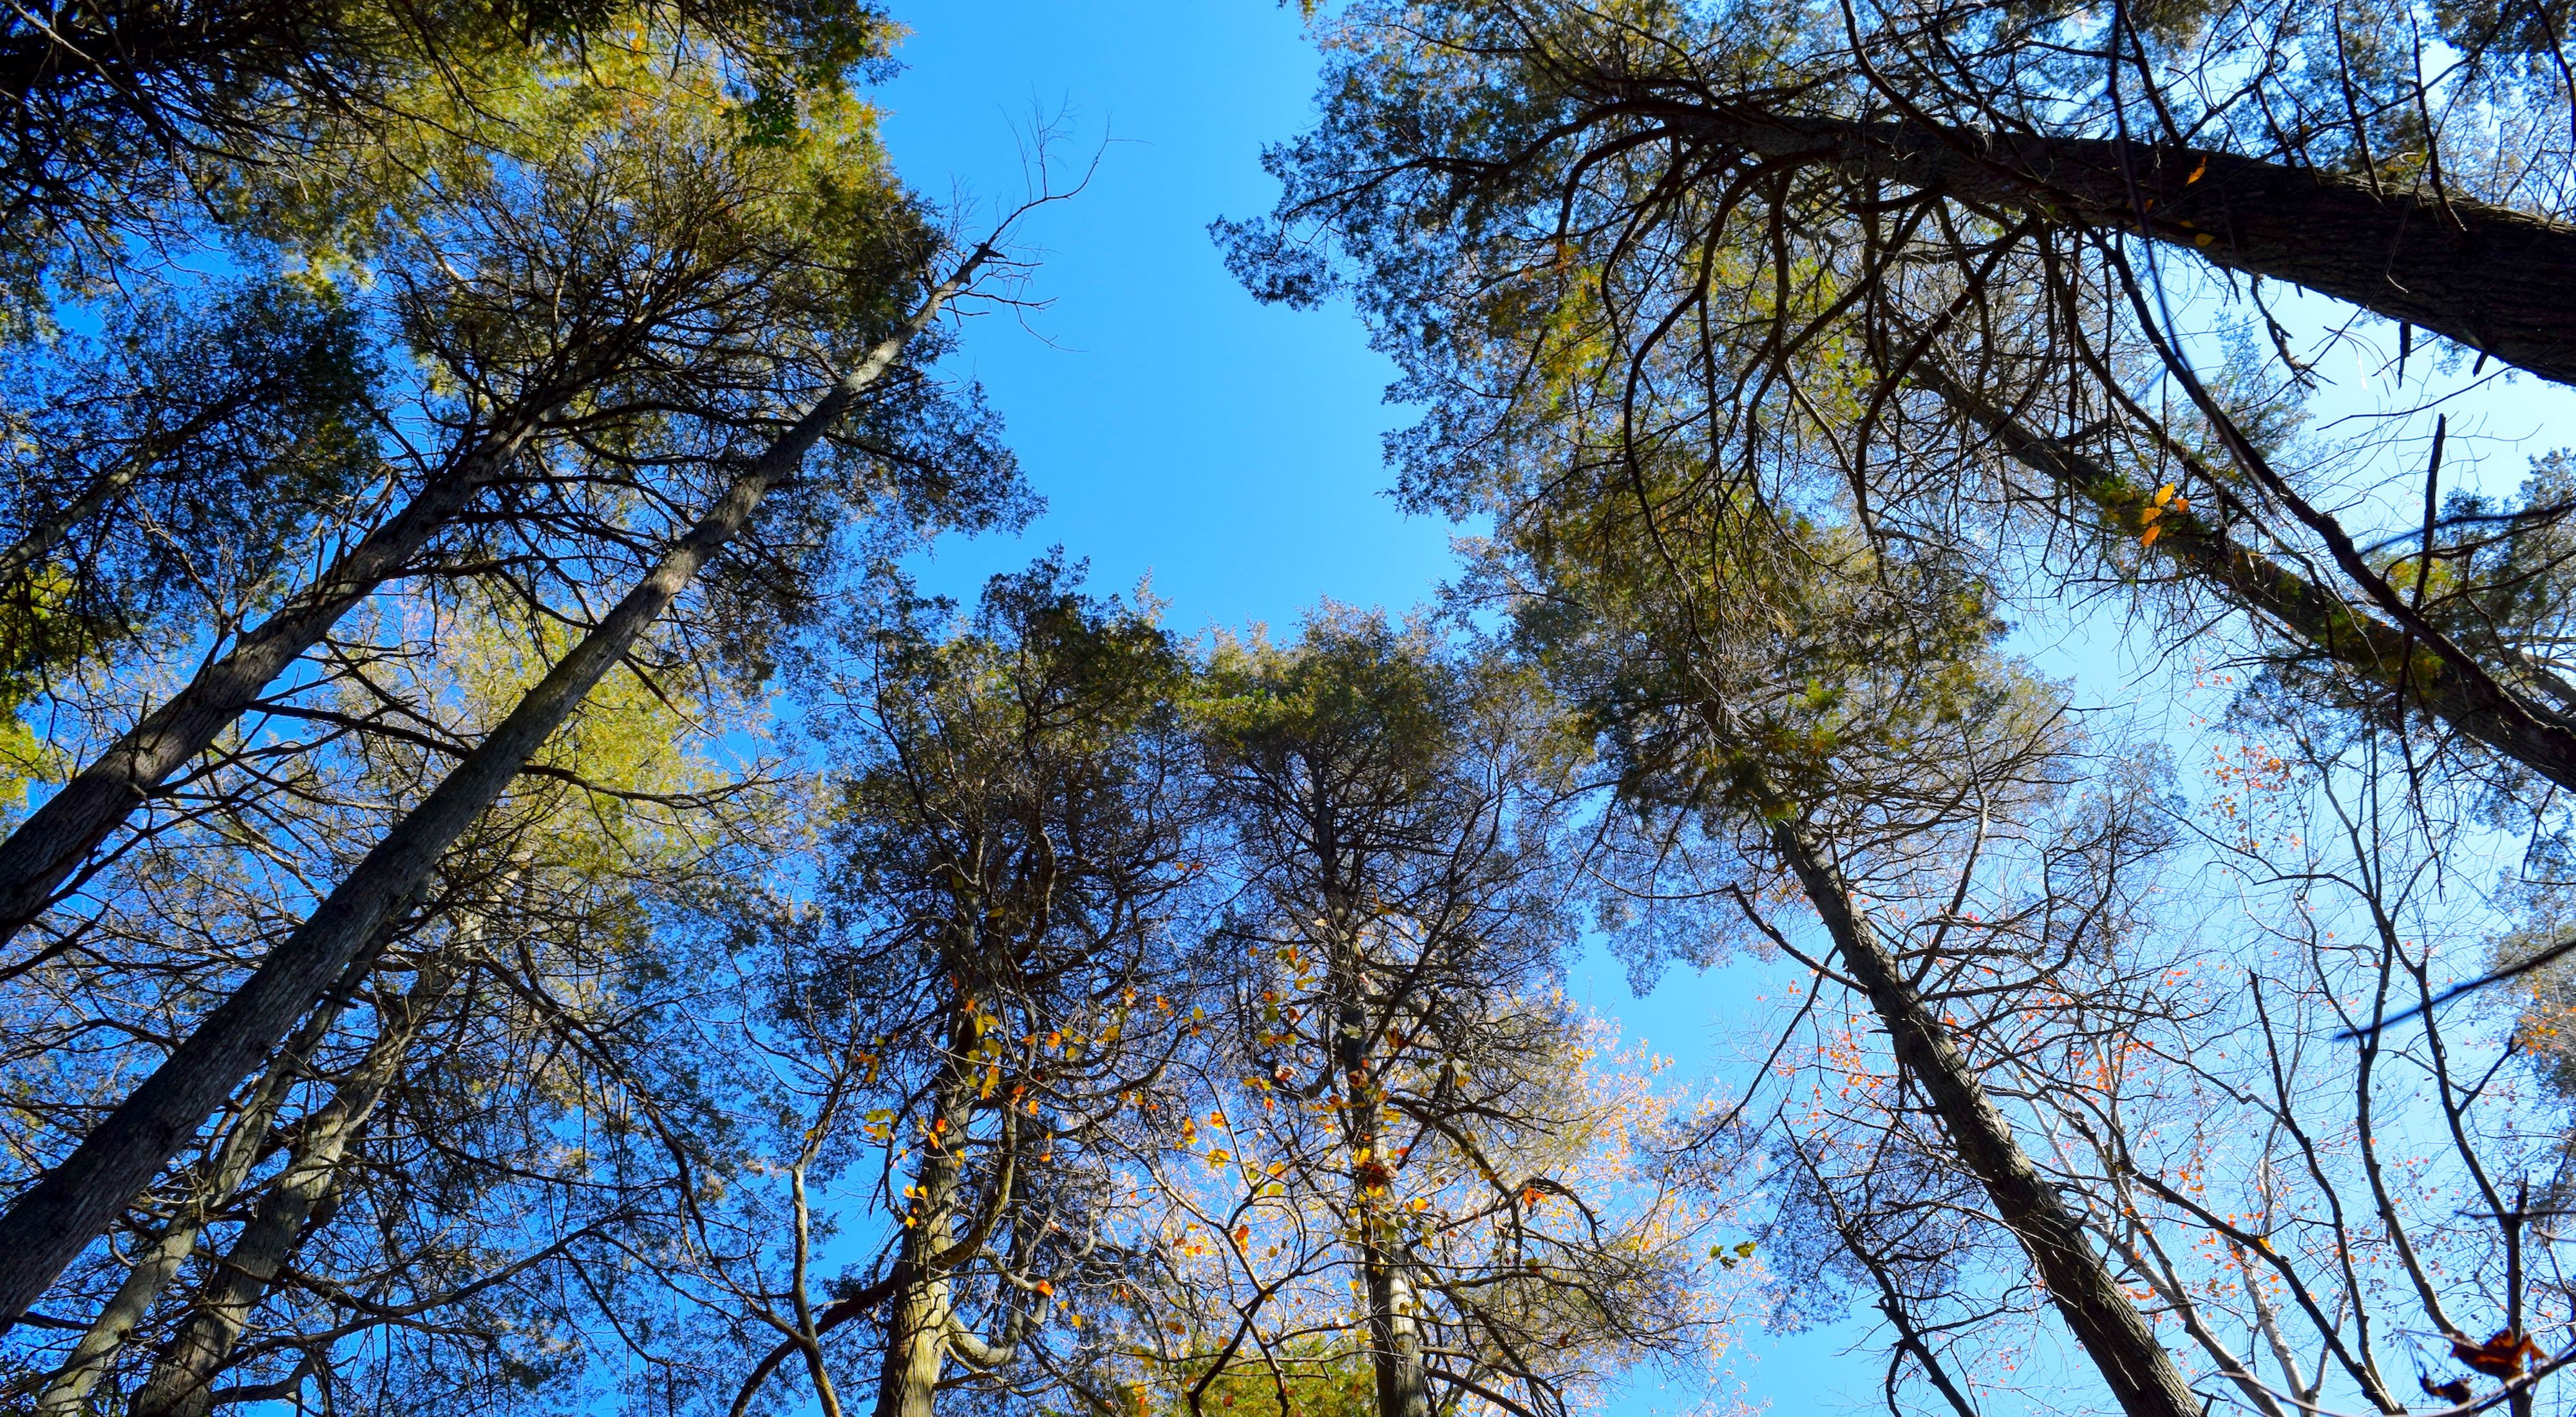 A view up to the sky looking at the tops of several tall and thin pine trees.